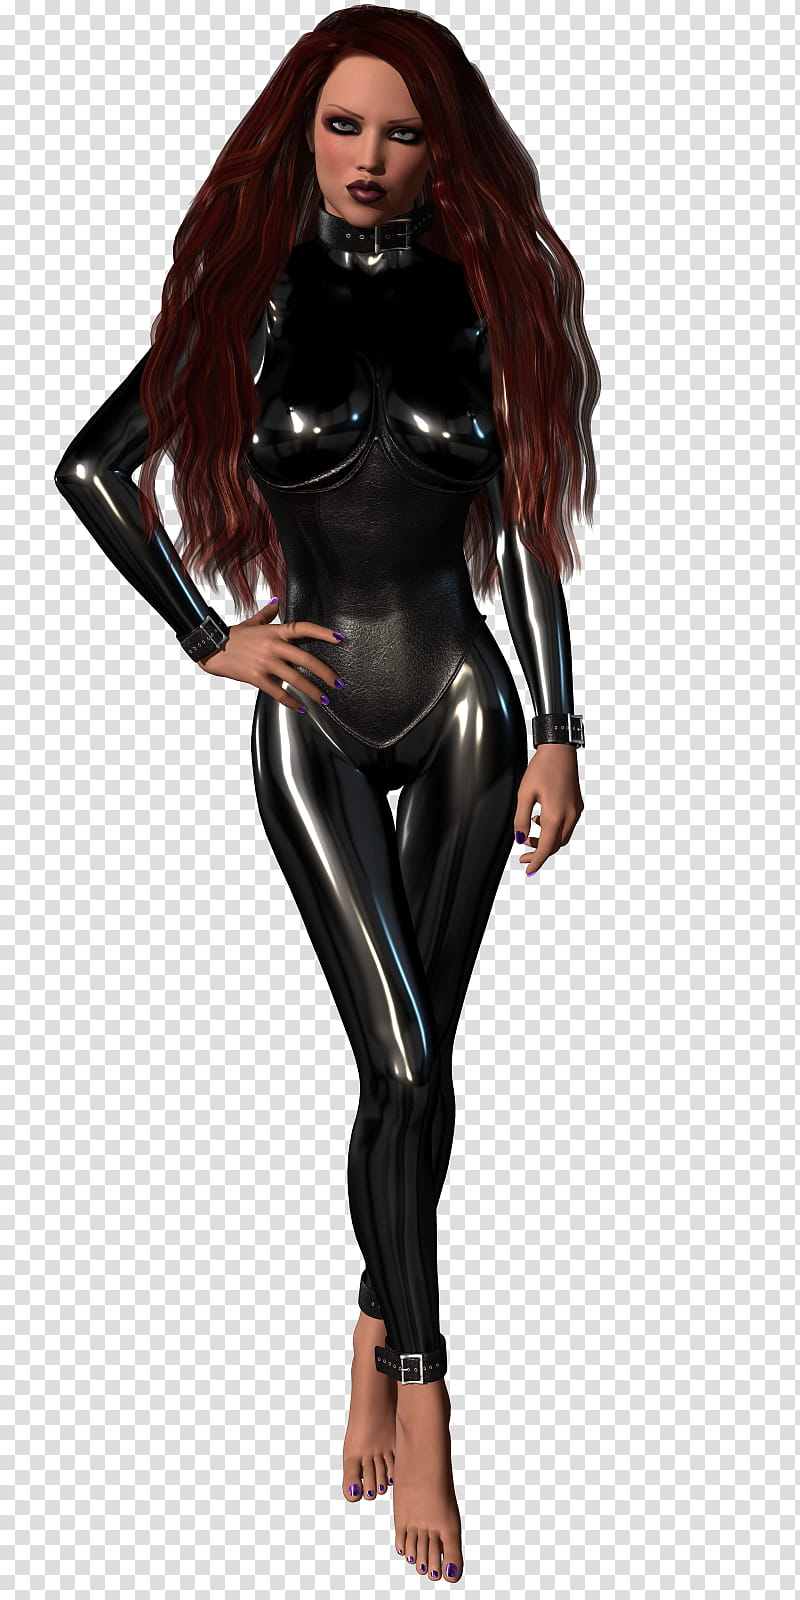 Latex and Leather, women's black faux leather jumpsuit transparent background PNG clipart